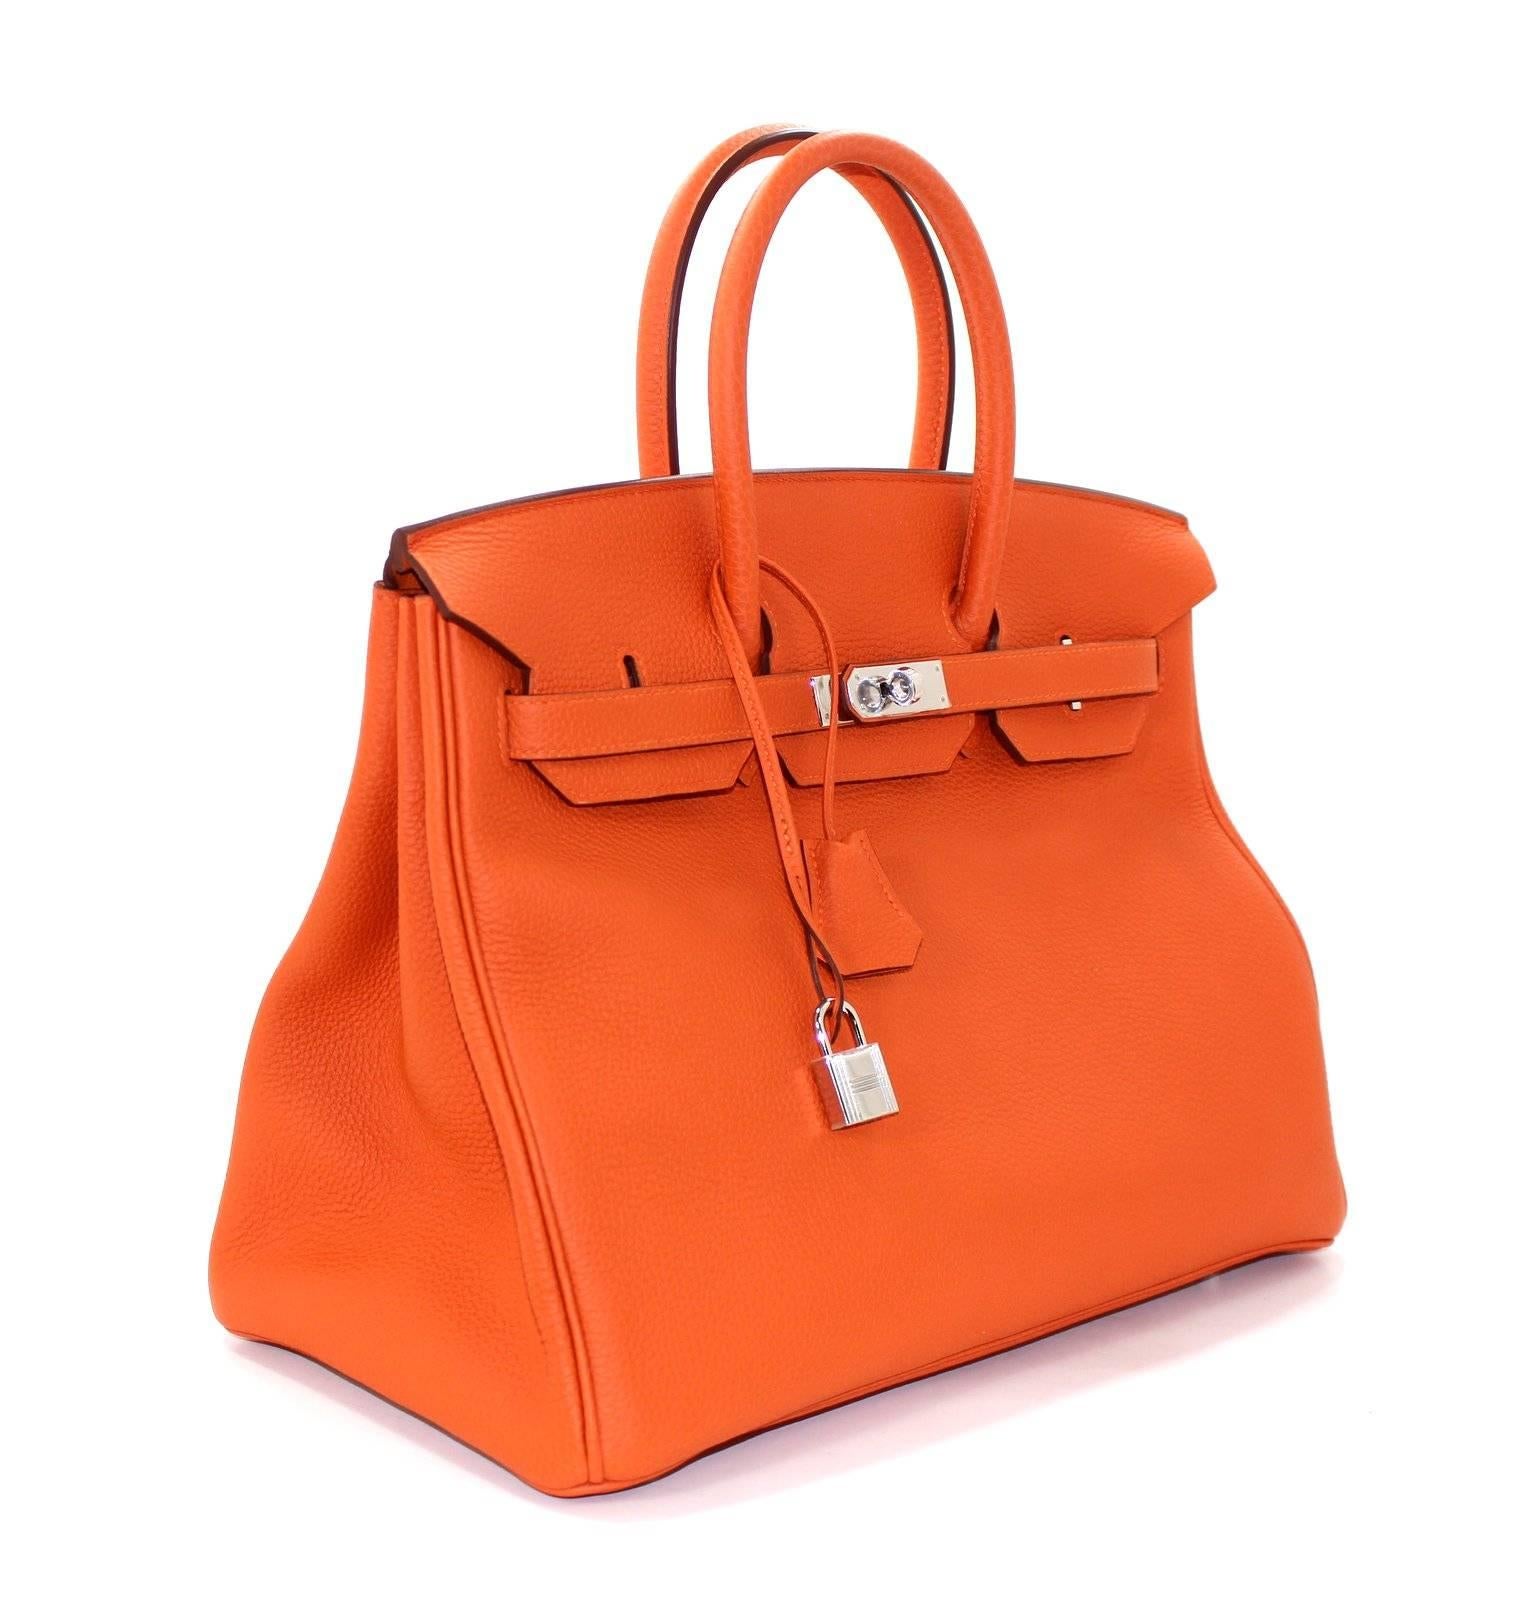 Hermès ORANGE 35 cm Birkin Bag is PRISTINE.  Store fresh (plastic on hardware) with padlock, keys, clochette, protective felt, raincoat, dust bags and Hermès box with tissue.  
World recognized as the penultimate luxury item, wait lists of a year